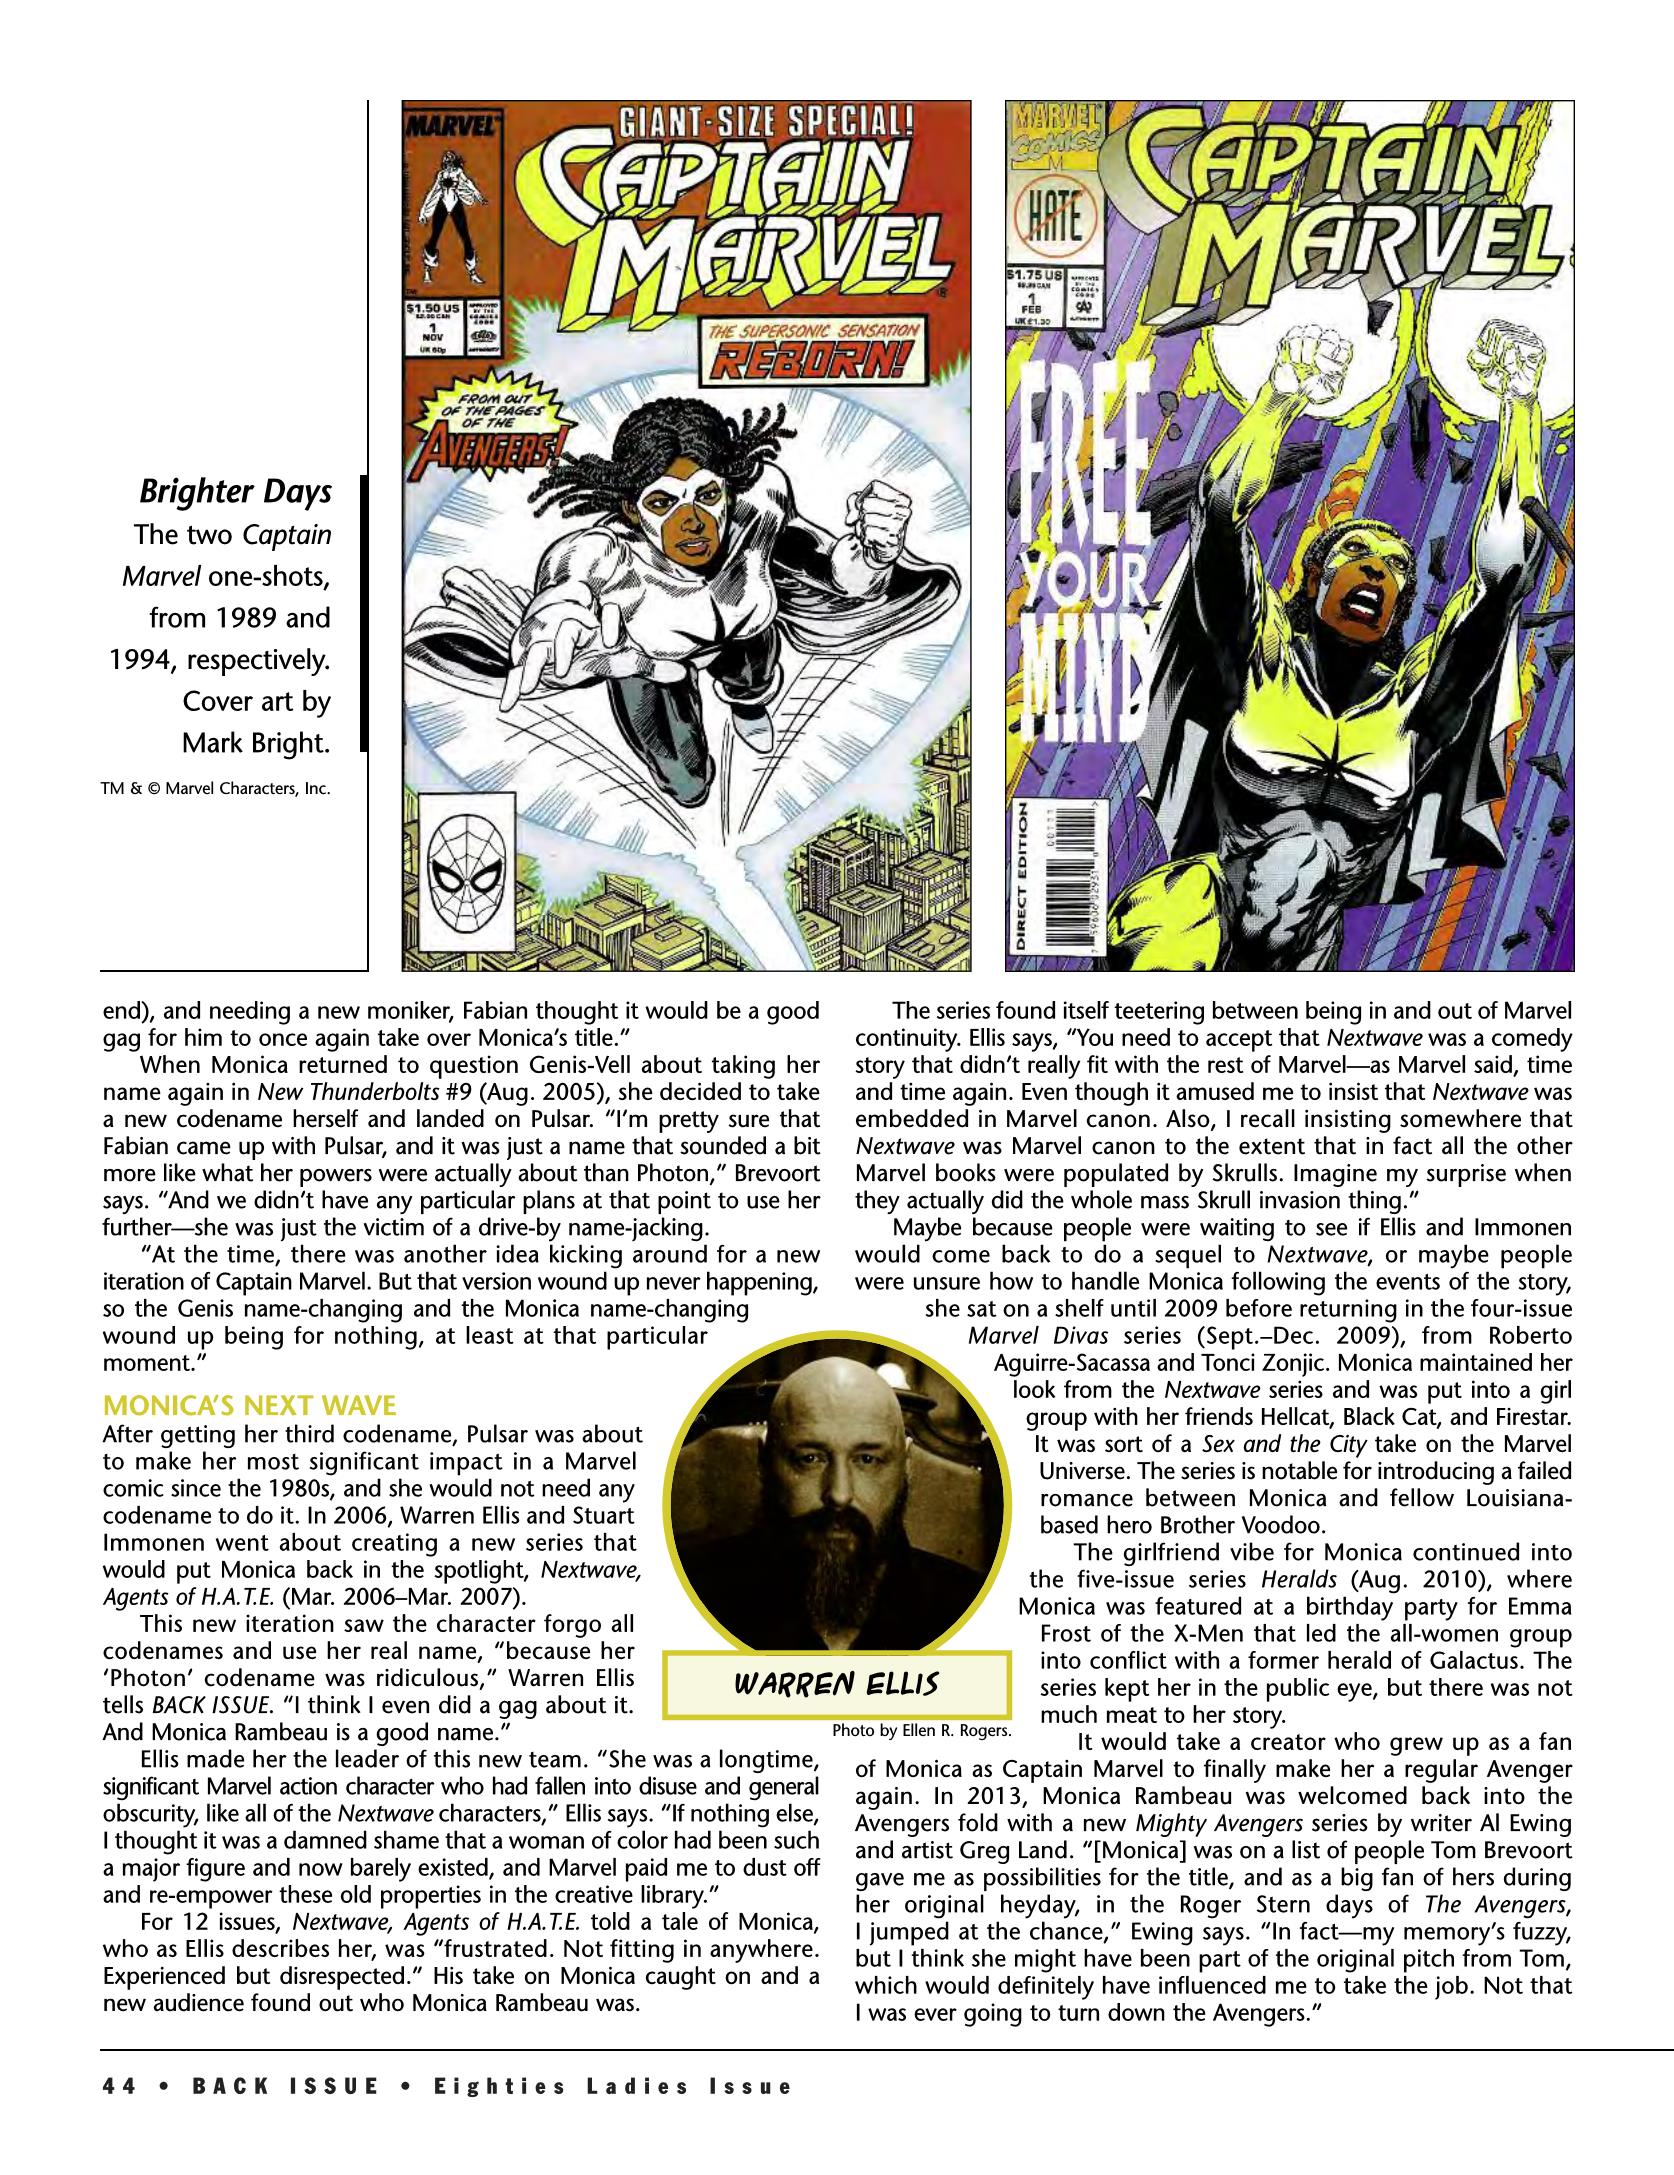 Read online Back Issue comic -  Issue #90 - 41